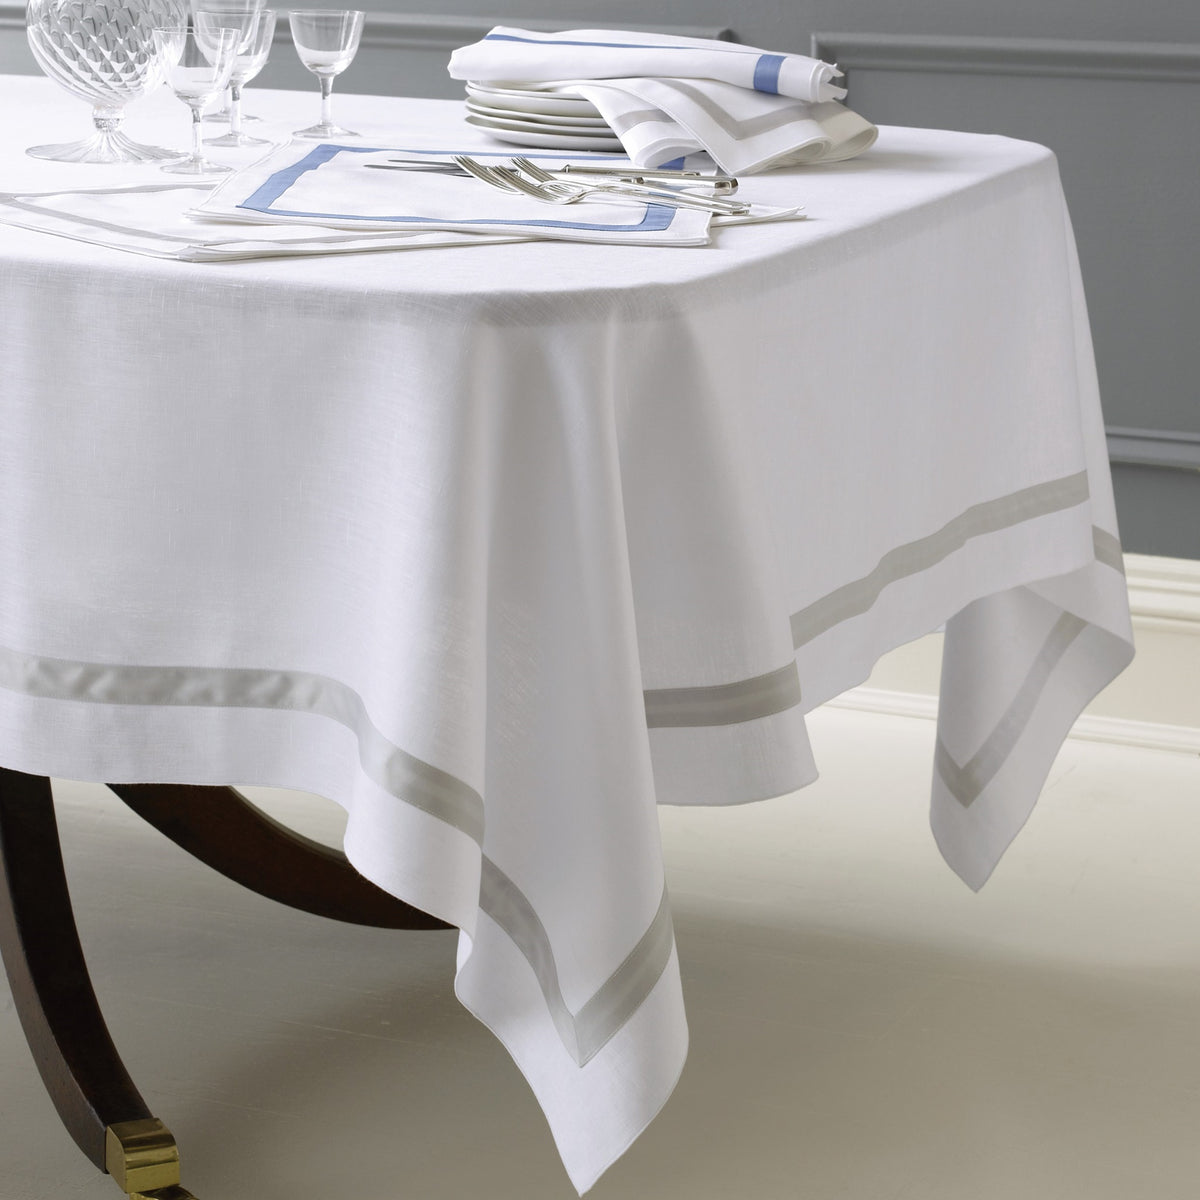 Lifestyle Image of Matouk Schumacher Lowell Table Linens in Color Silver and Azure